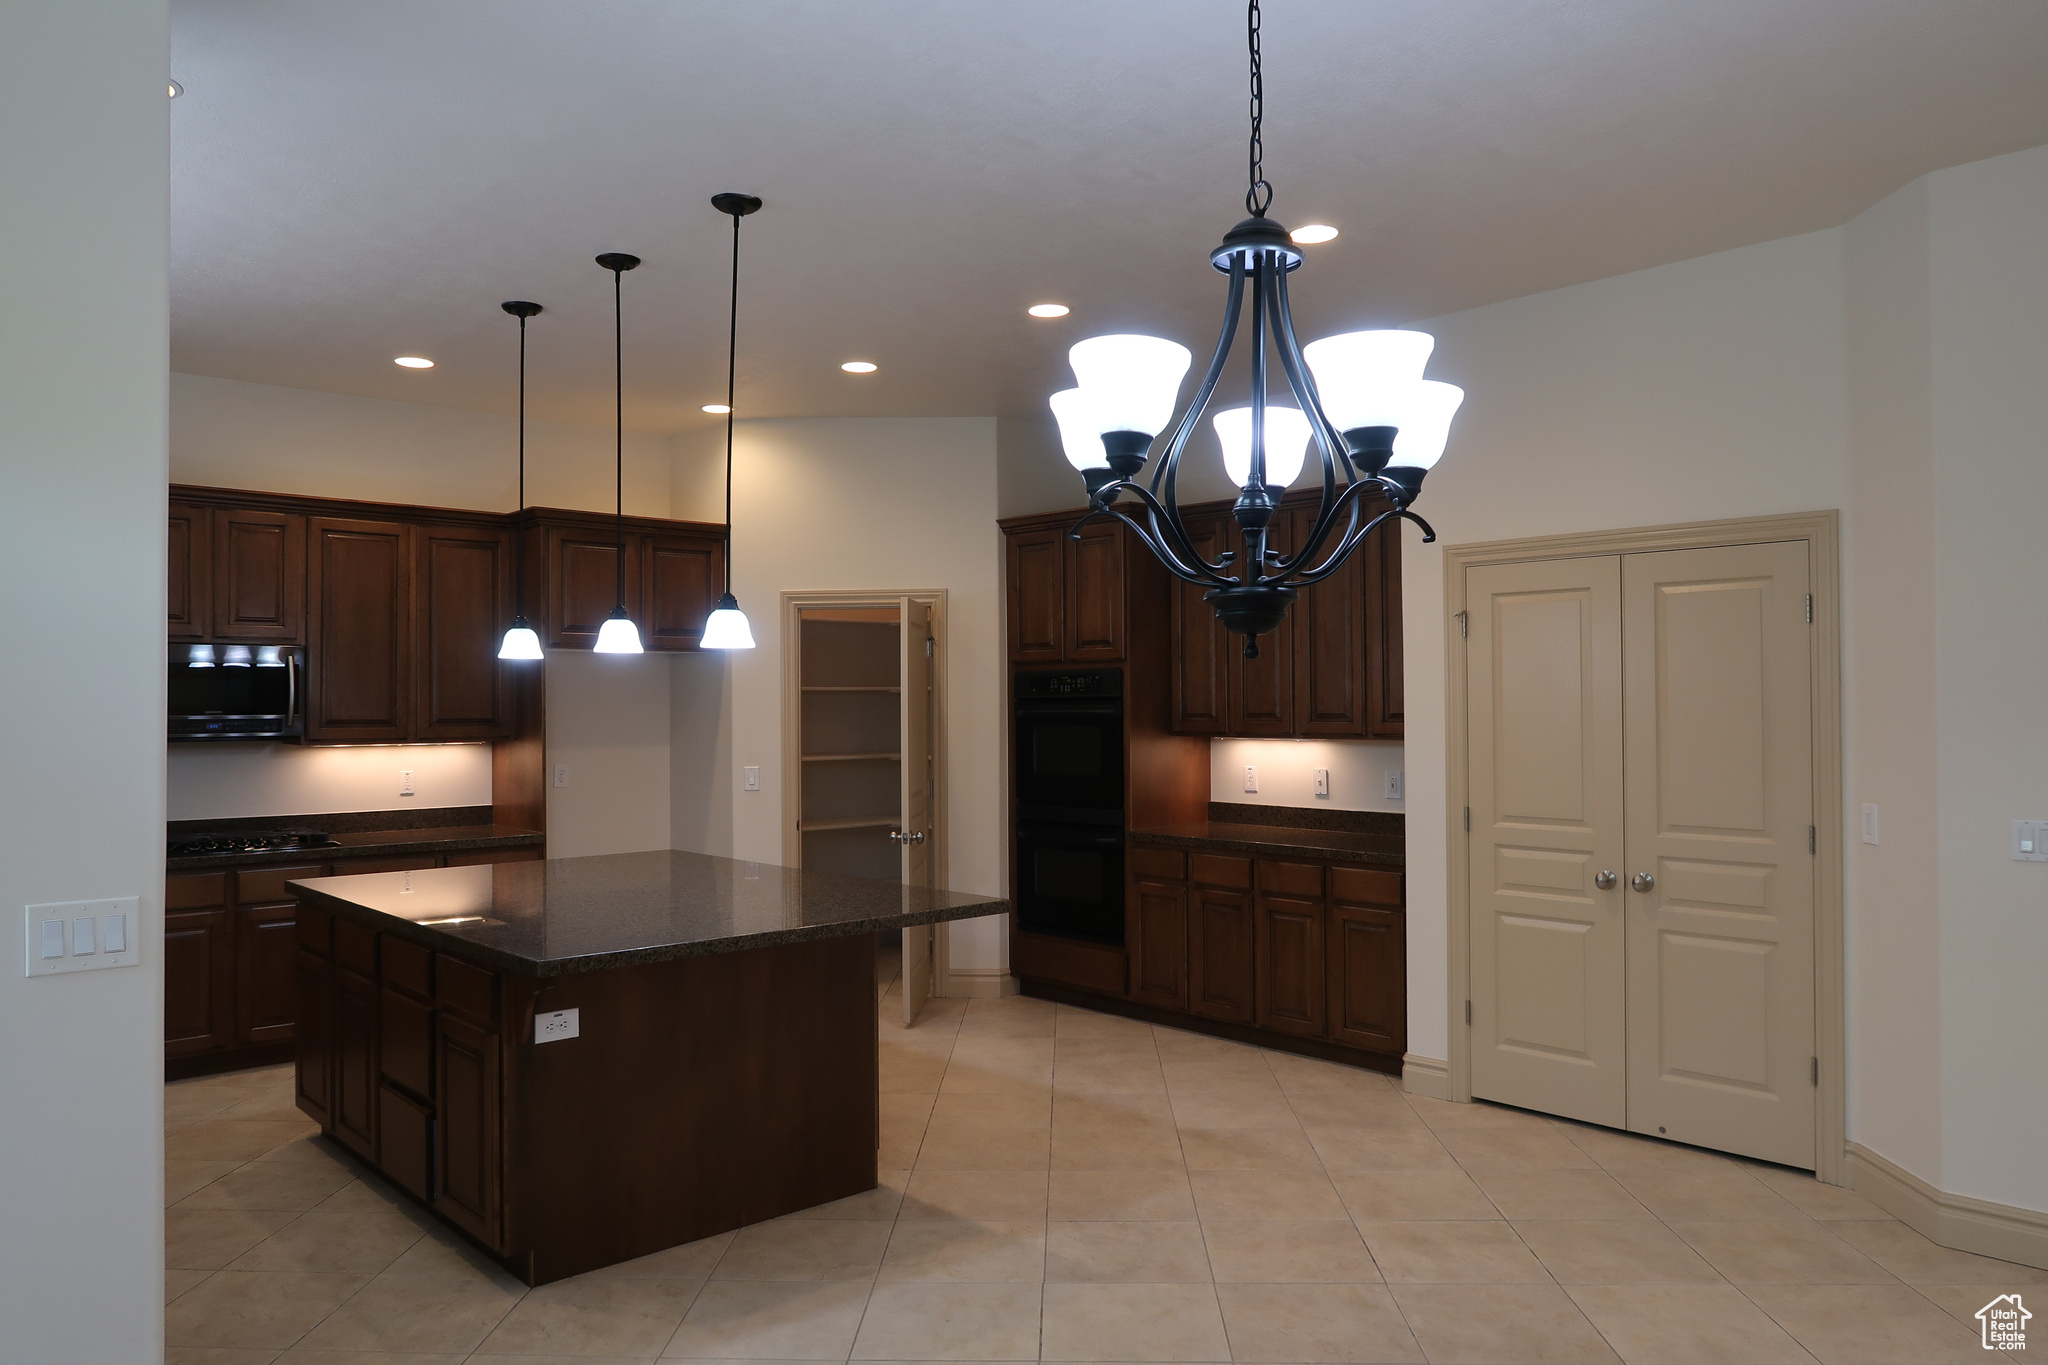 Kitchen with a center island, pendant lighting, black double oven, a notable chandelier, and light tile floors